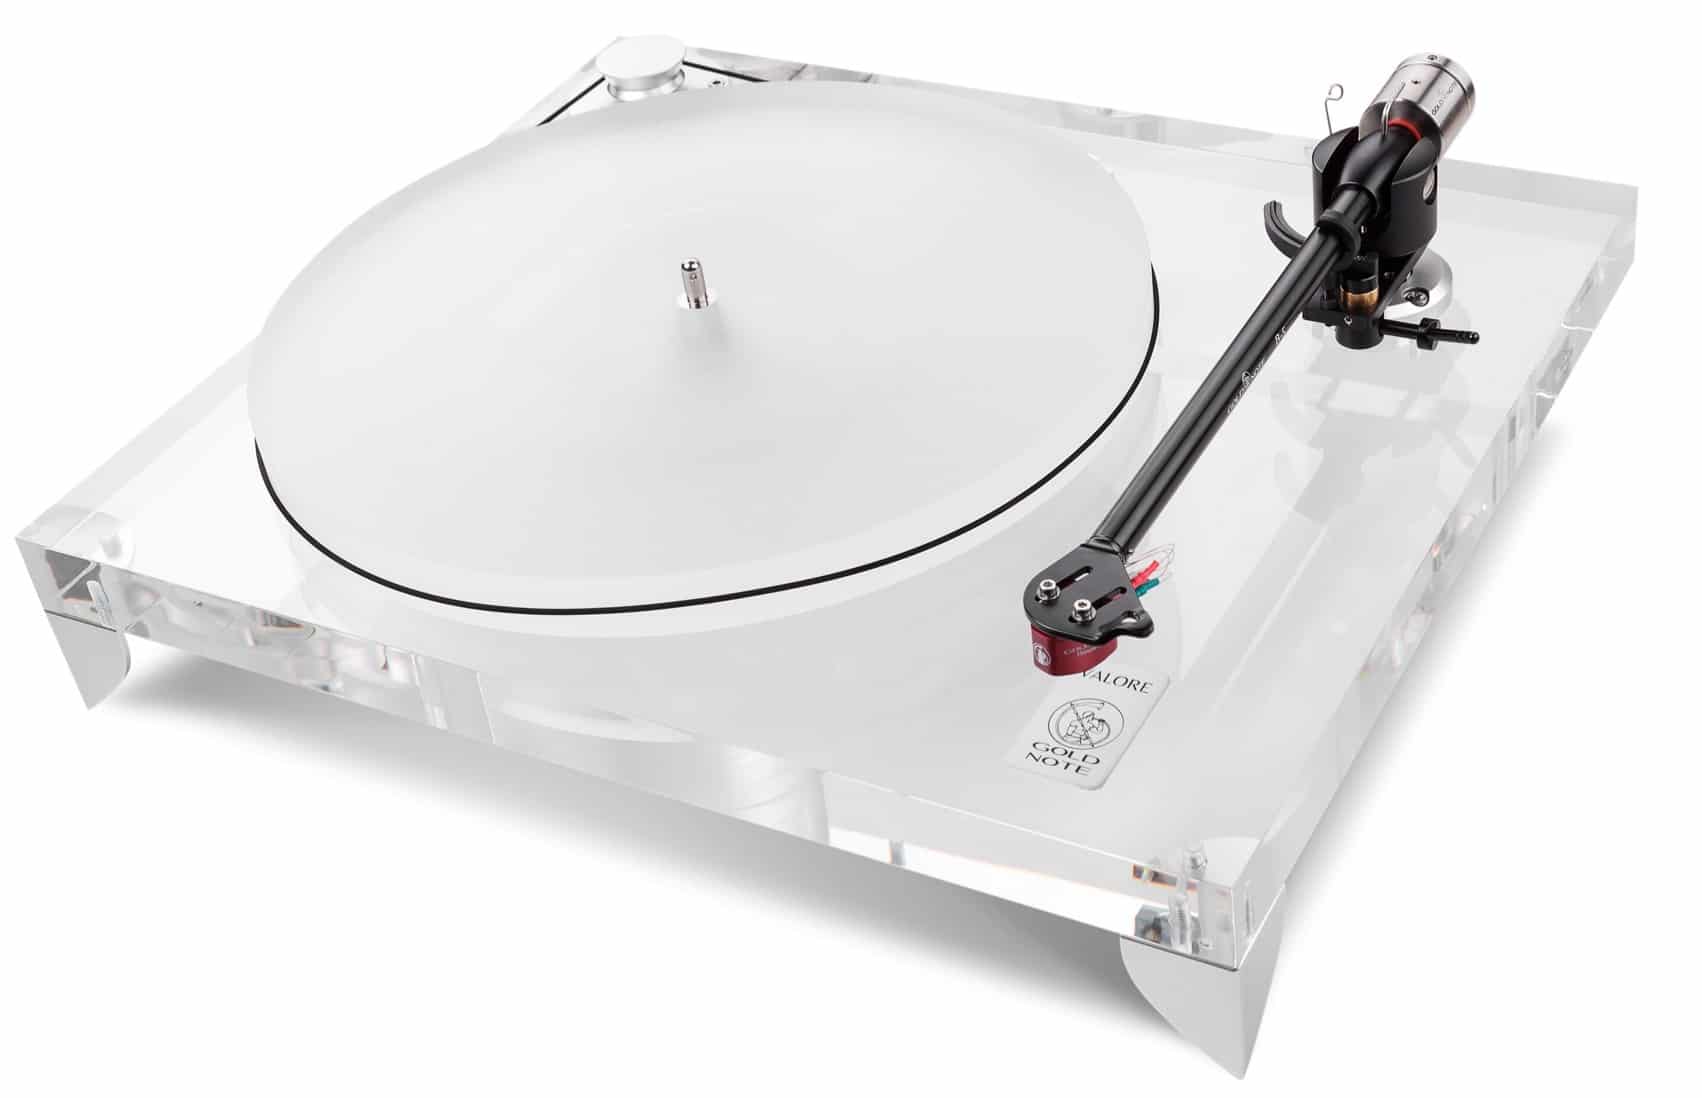 Valore 425 Turntable From Gold Note